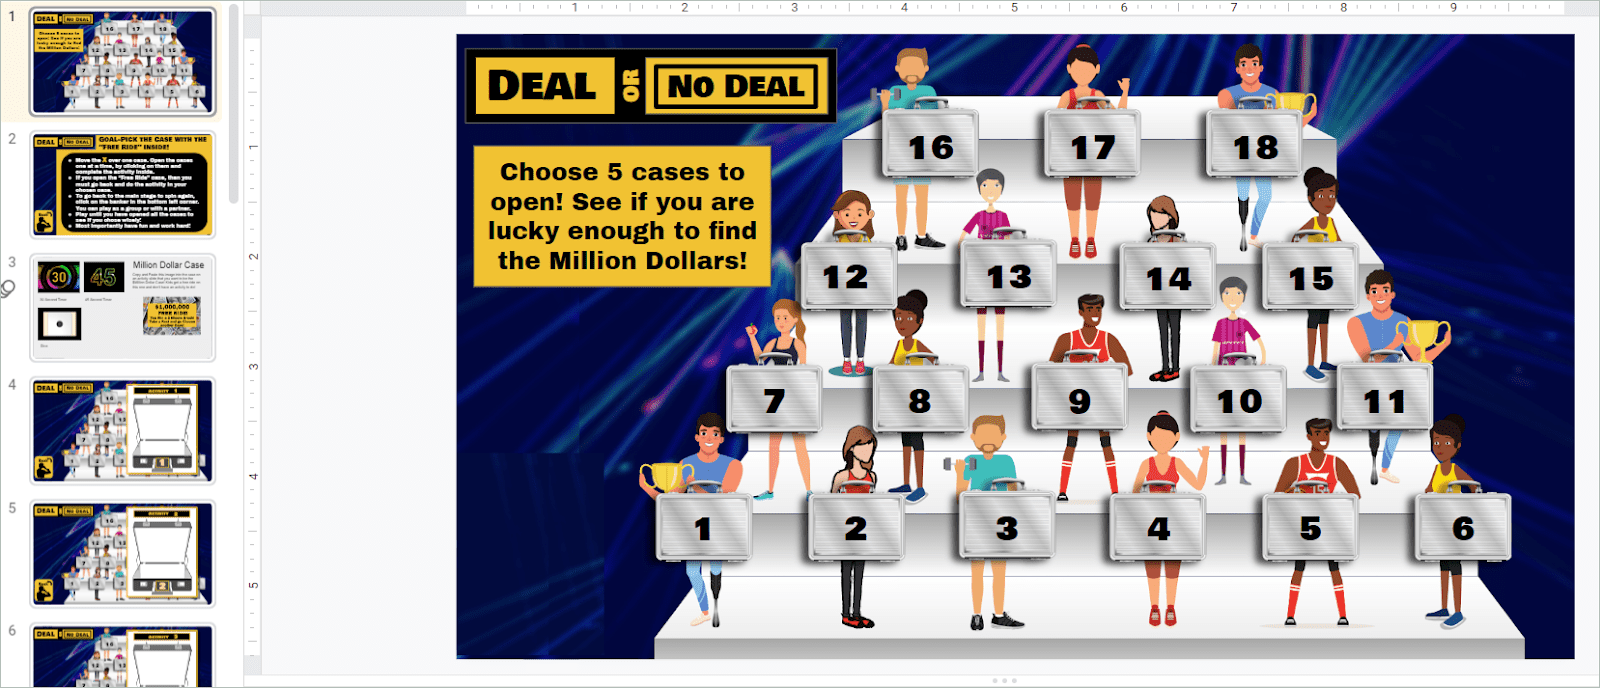 Deal or No Deal Game Template